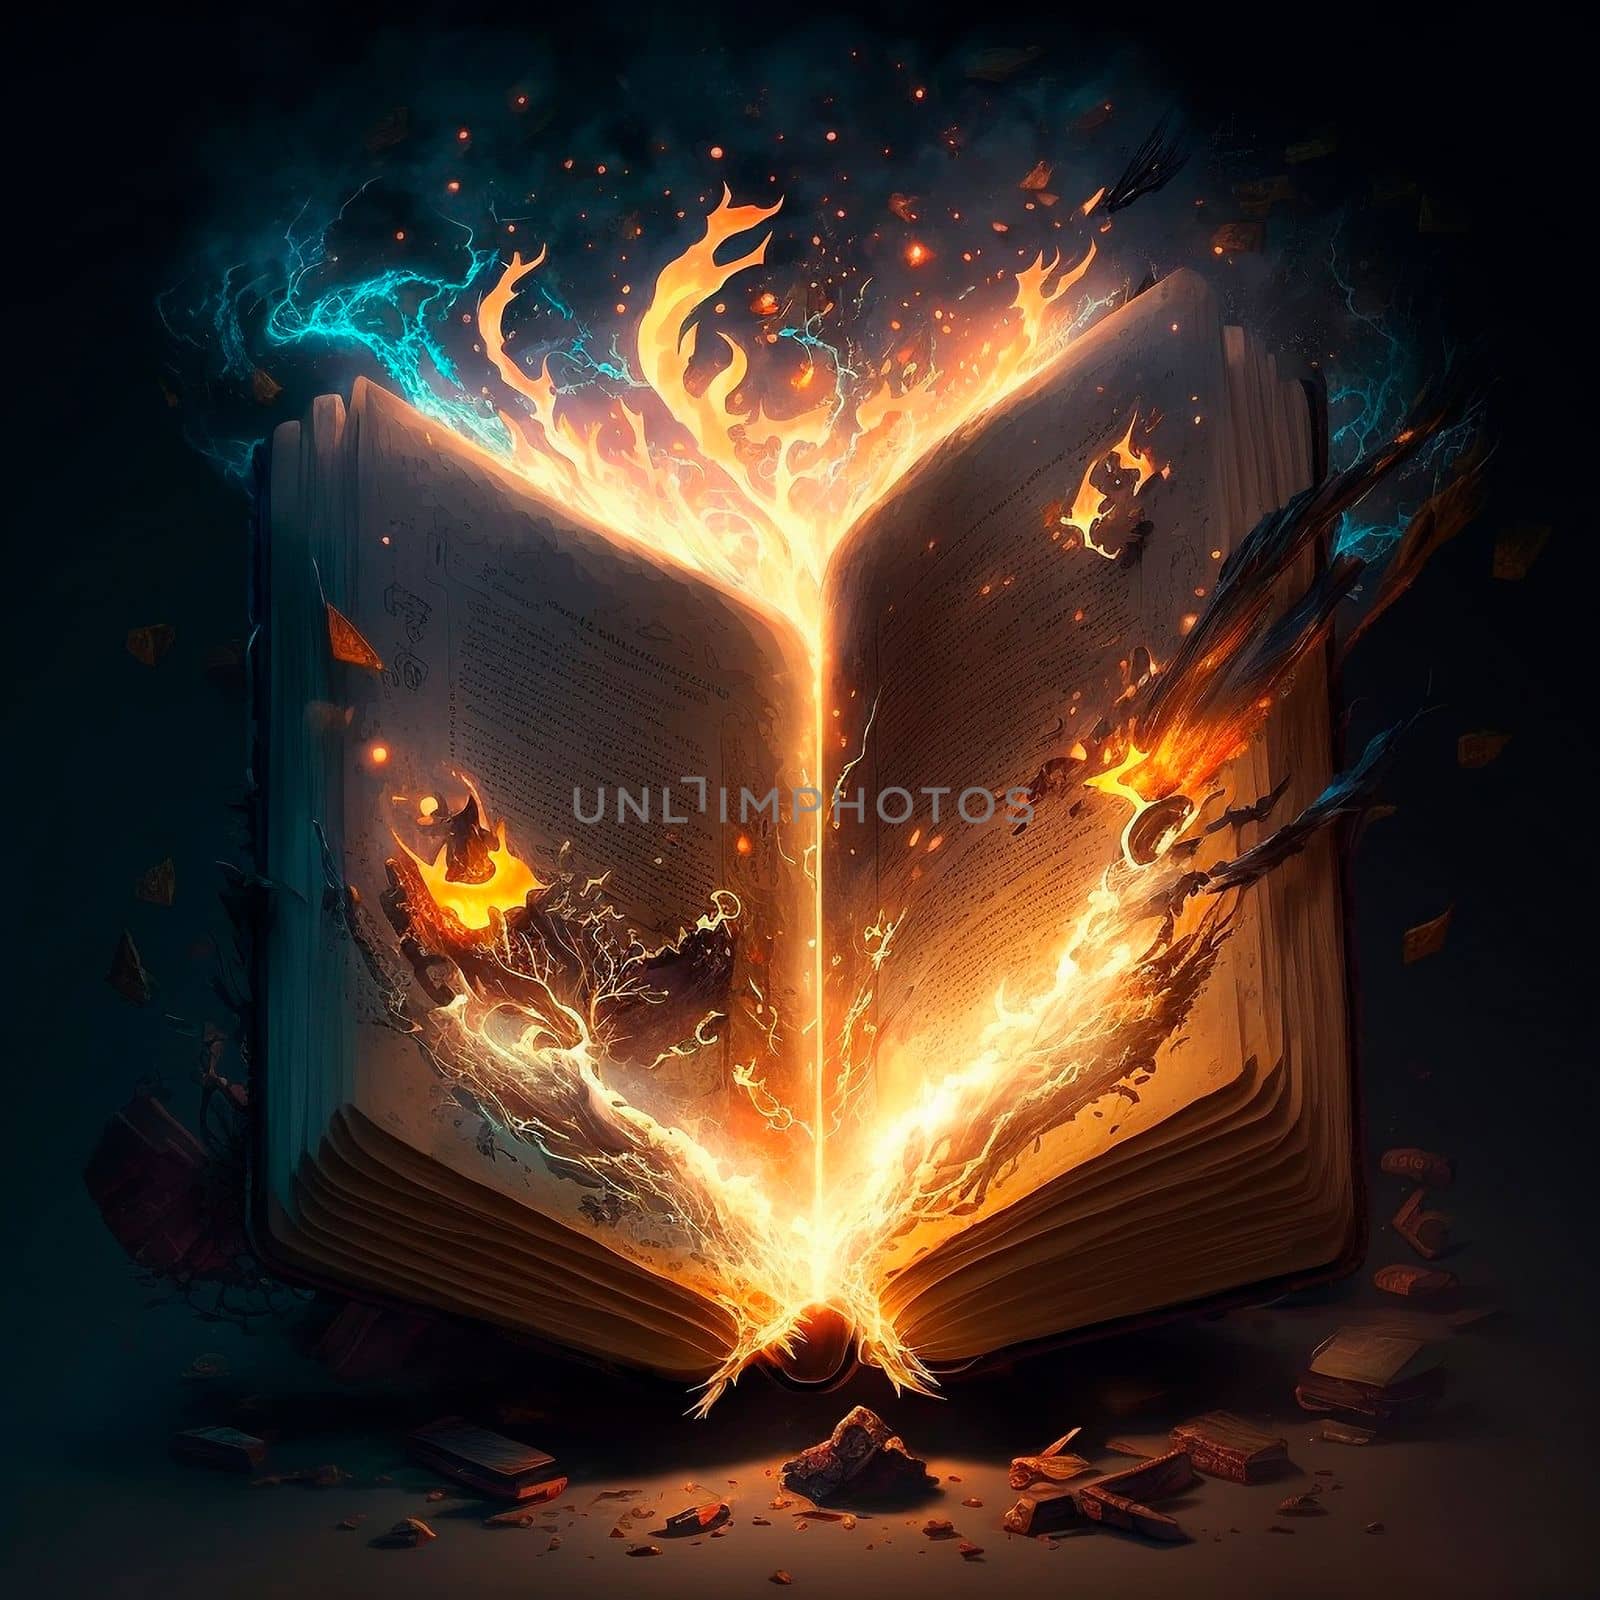 A magical book engulfed in flames and lightning. High quality illustration